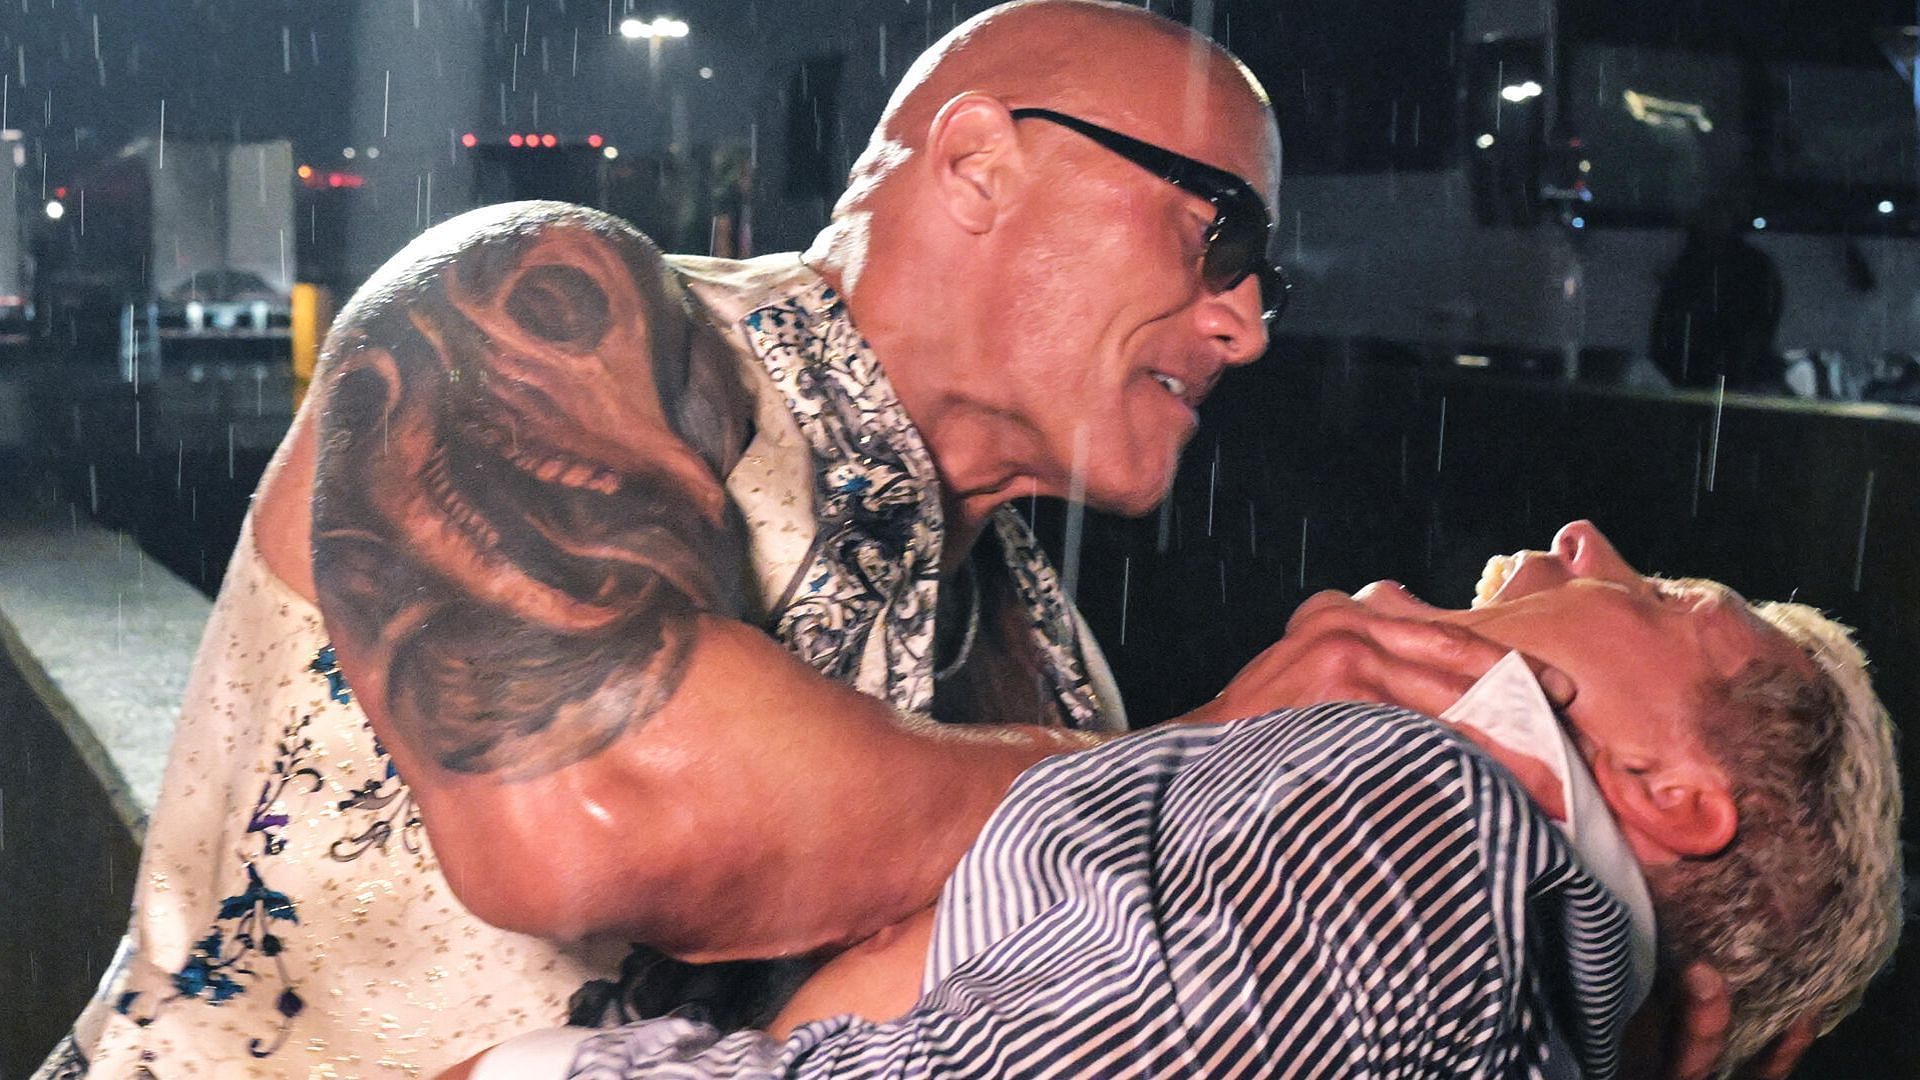 The Rock brutally attacked Cody Rhodes on WWE RAW.